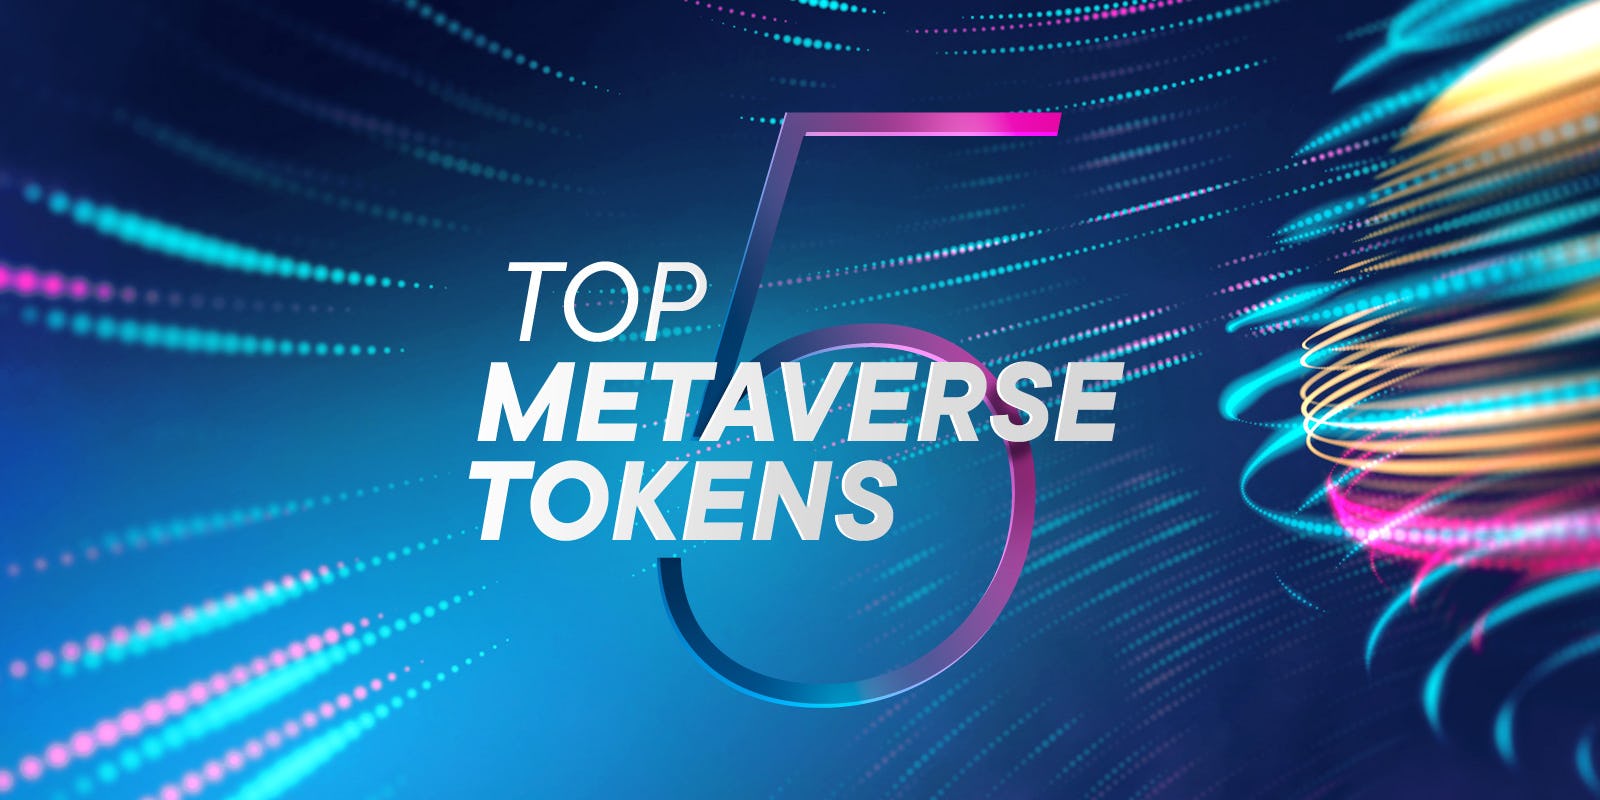 The top 5 Metaverse tokens